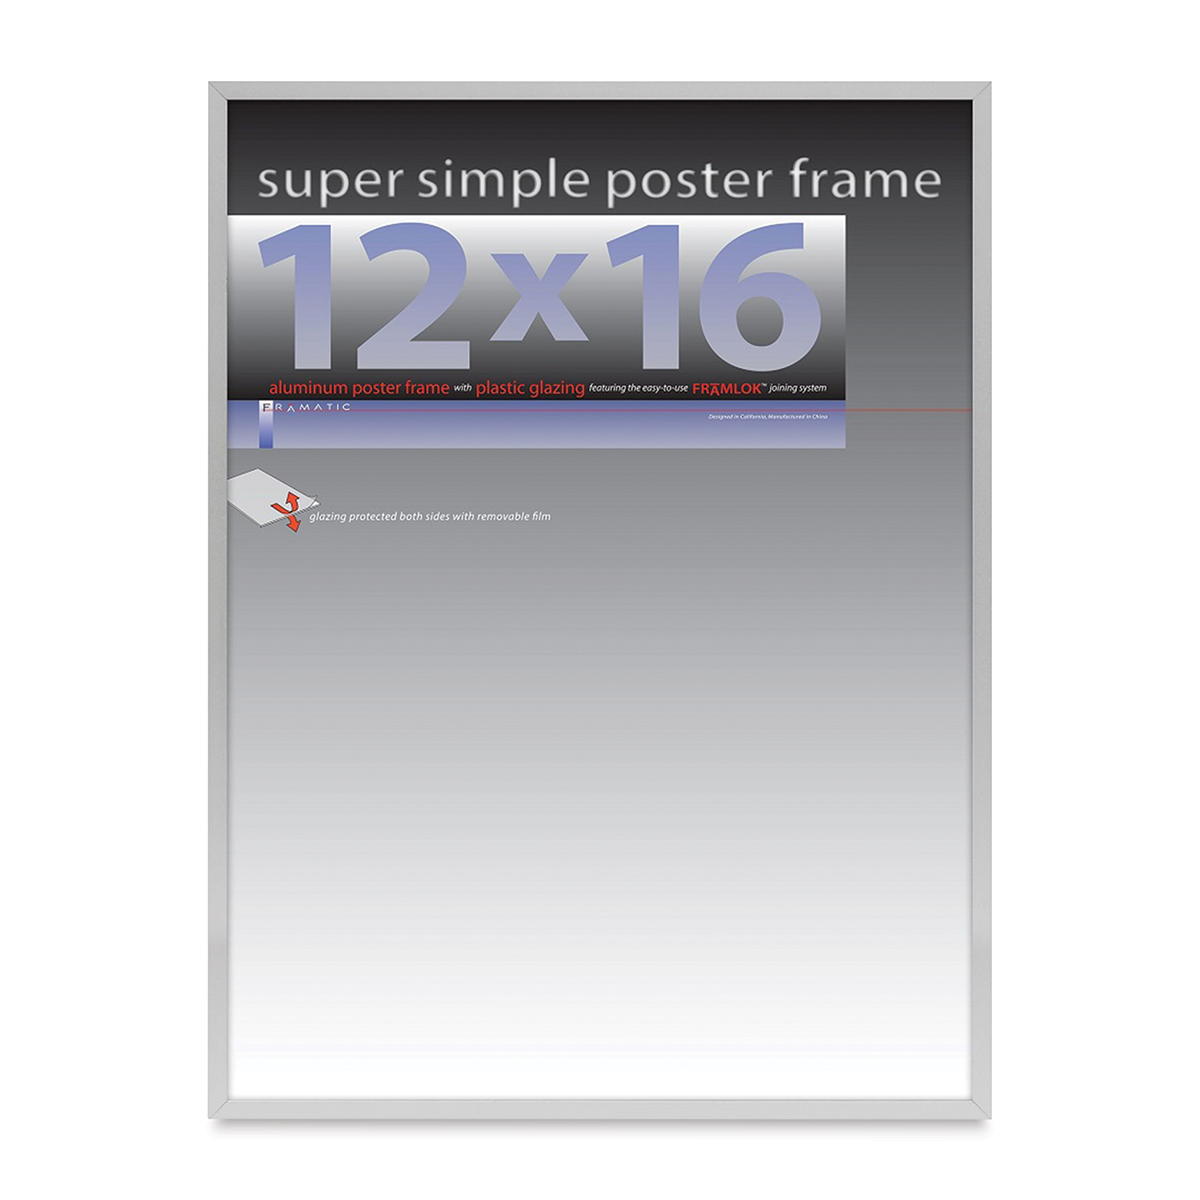 Framatic Super Simple Poster Frame - Silver, 12 x 16